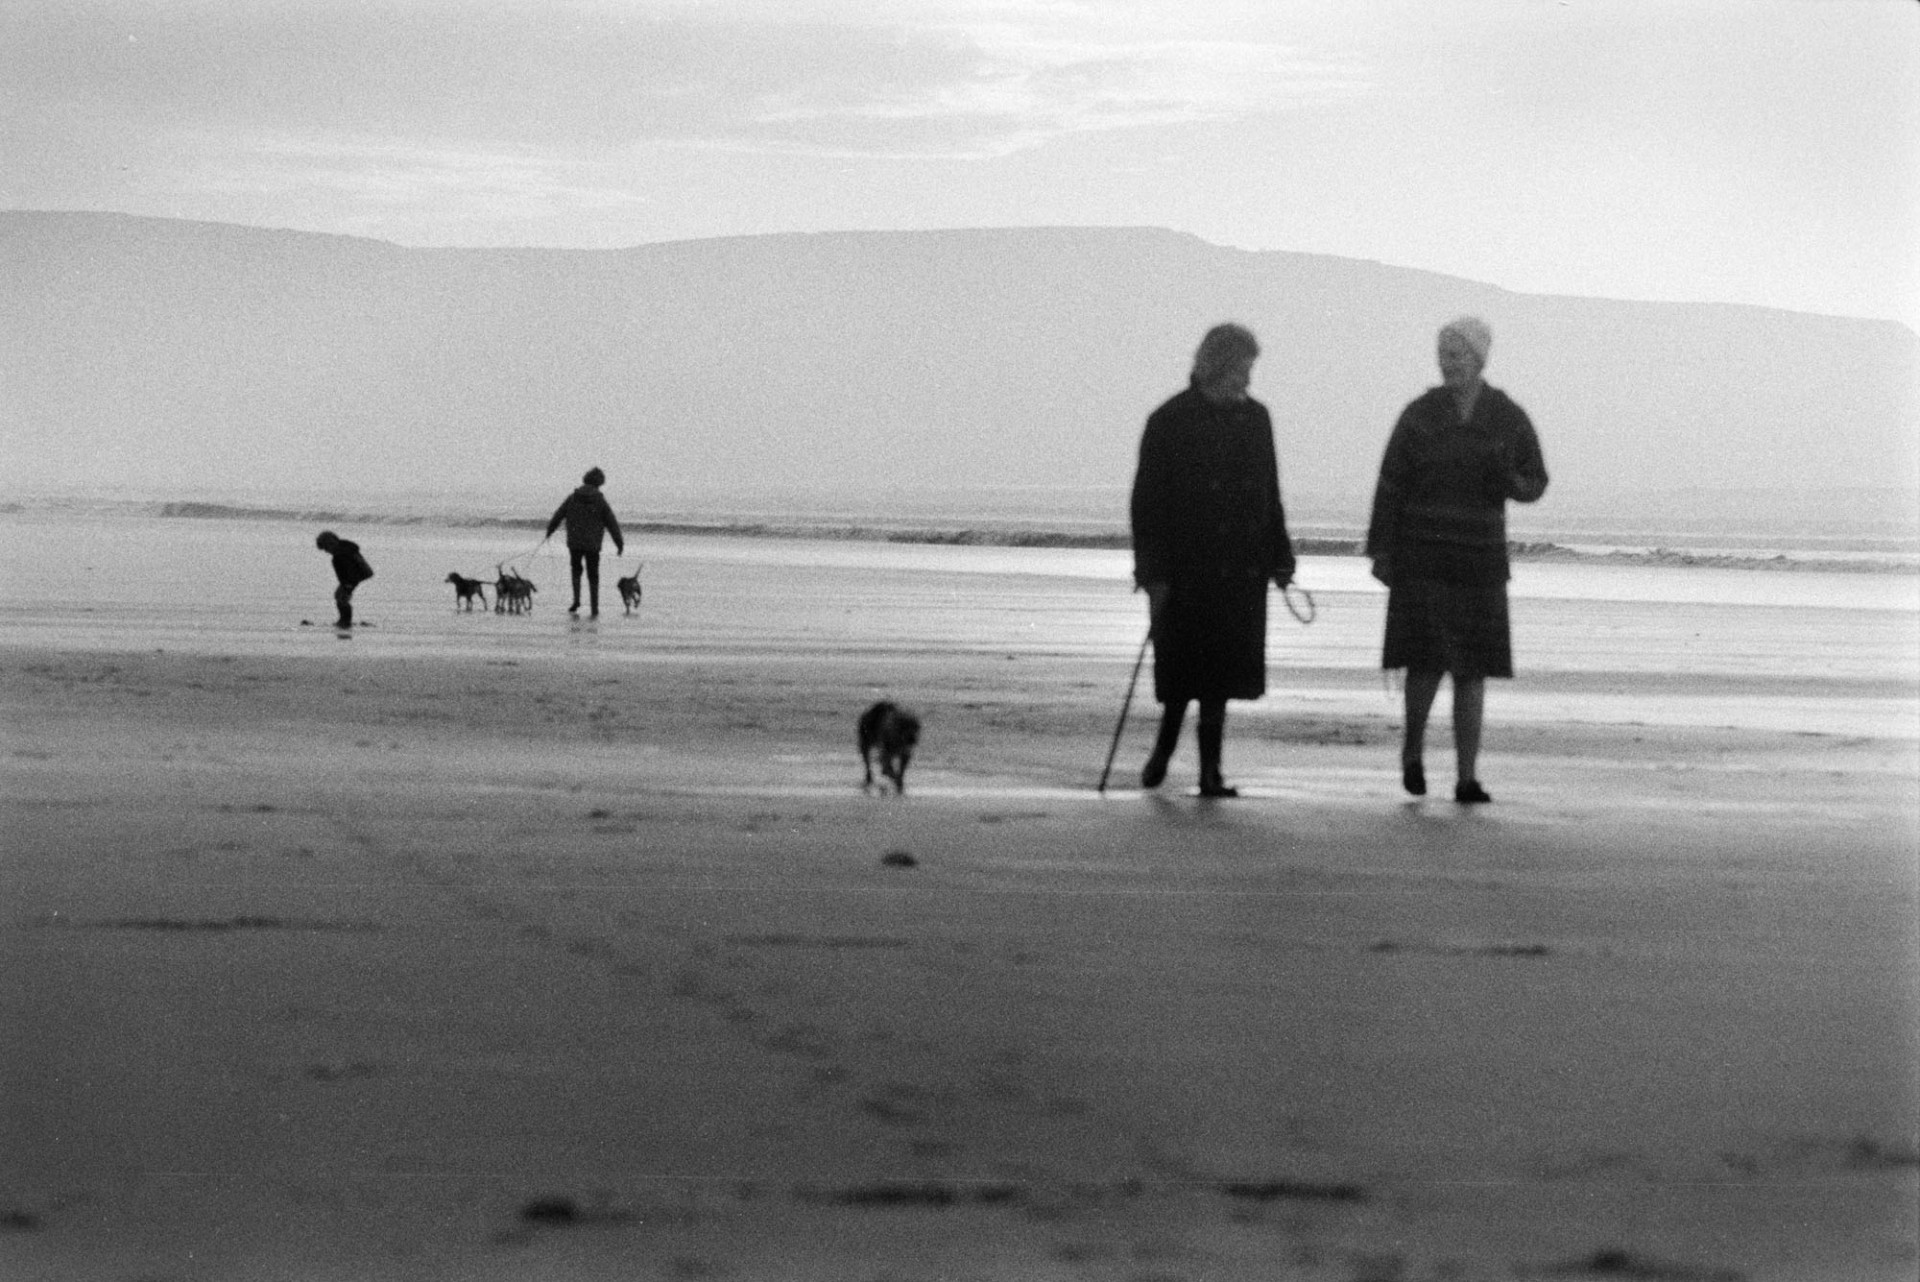 People walking dogs along the beach, possibly at Bude.